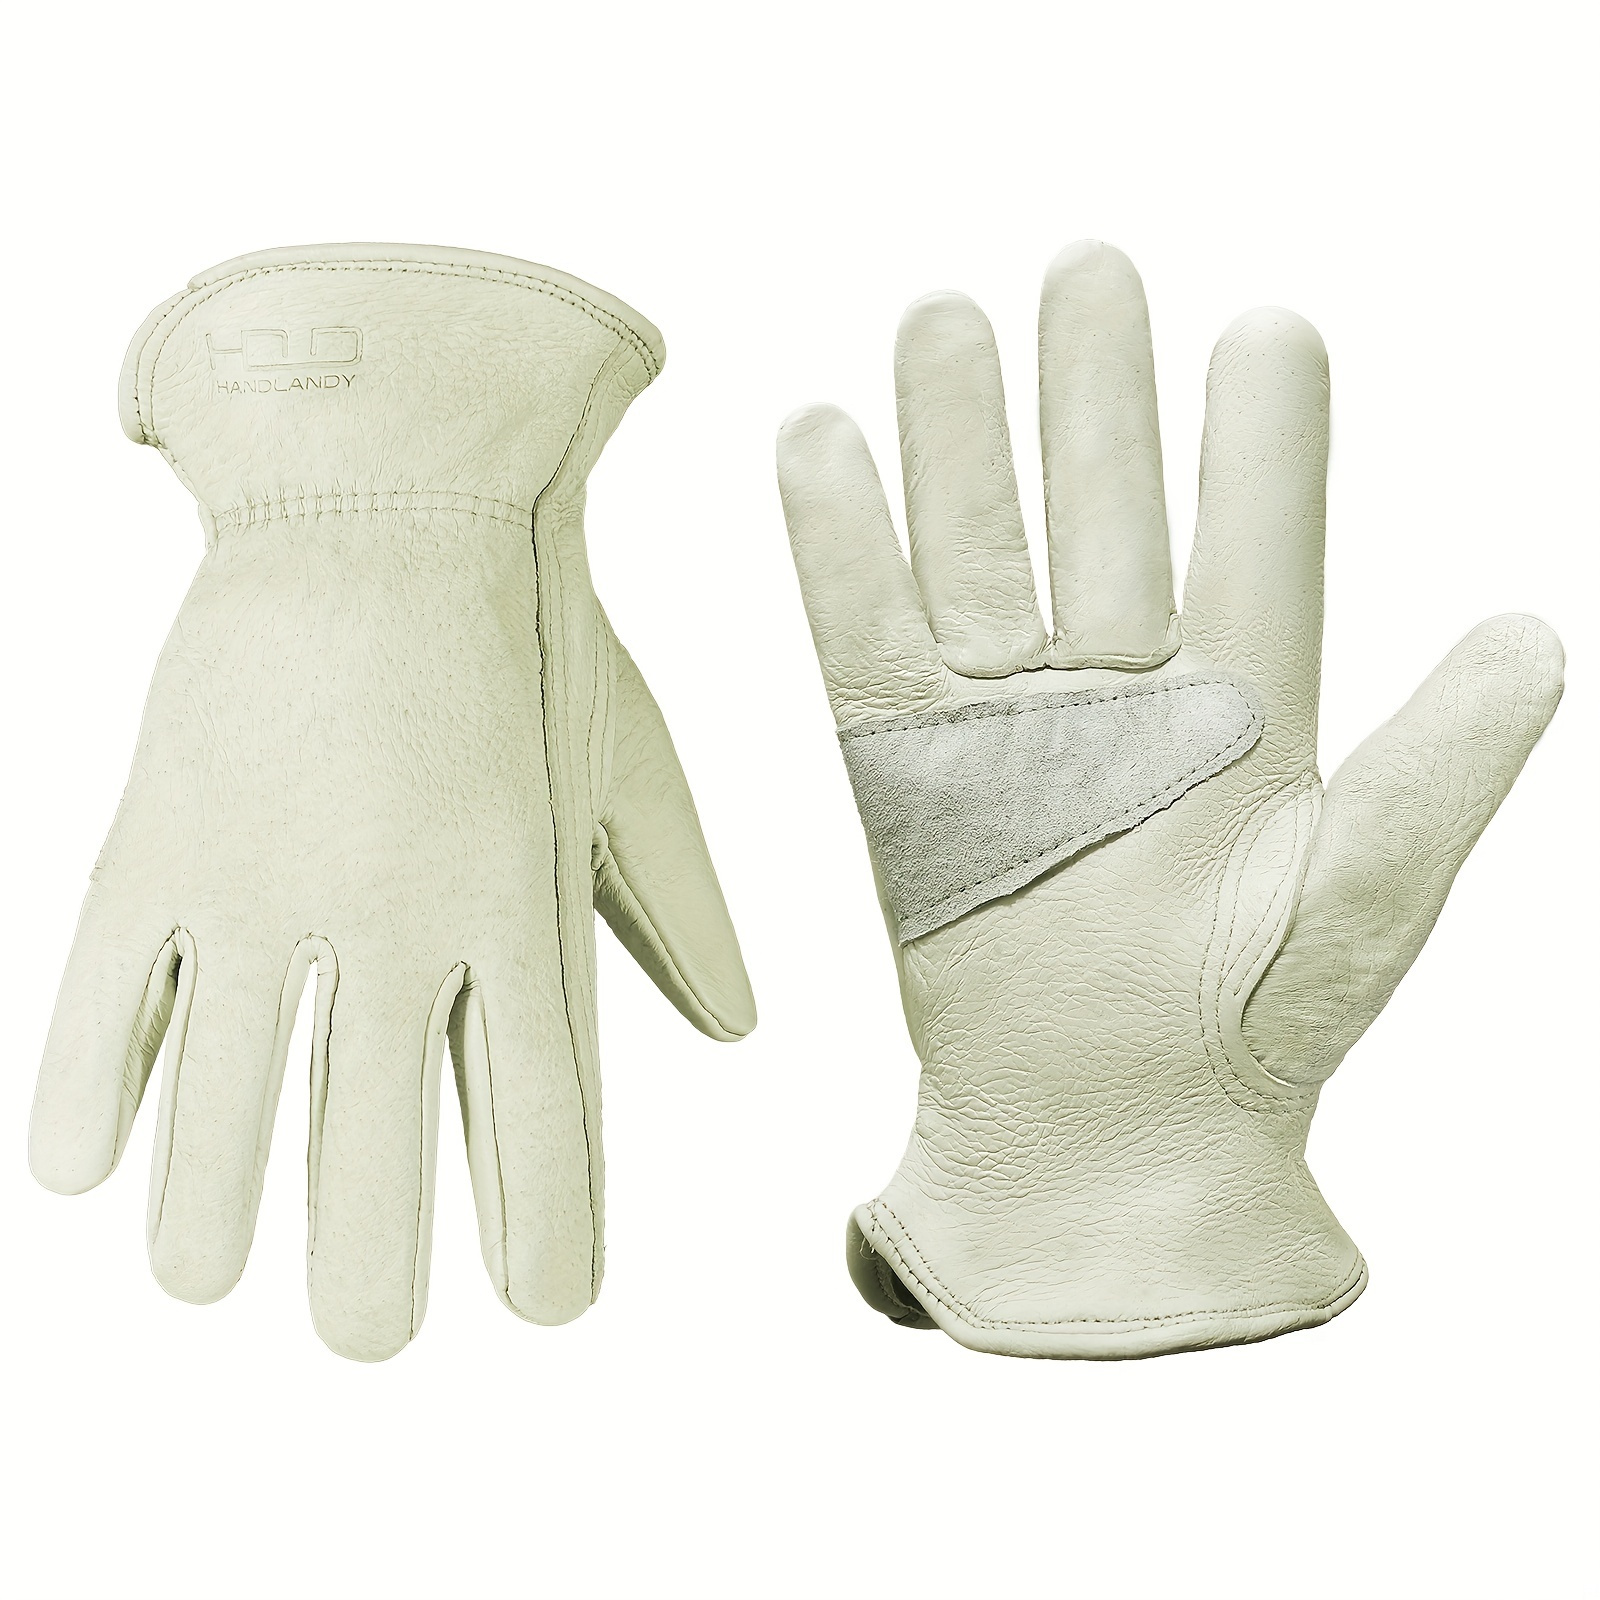 DIRTY RIGGER COMFORT FIT GLOVES Full handed, extra extra large (pair)